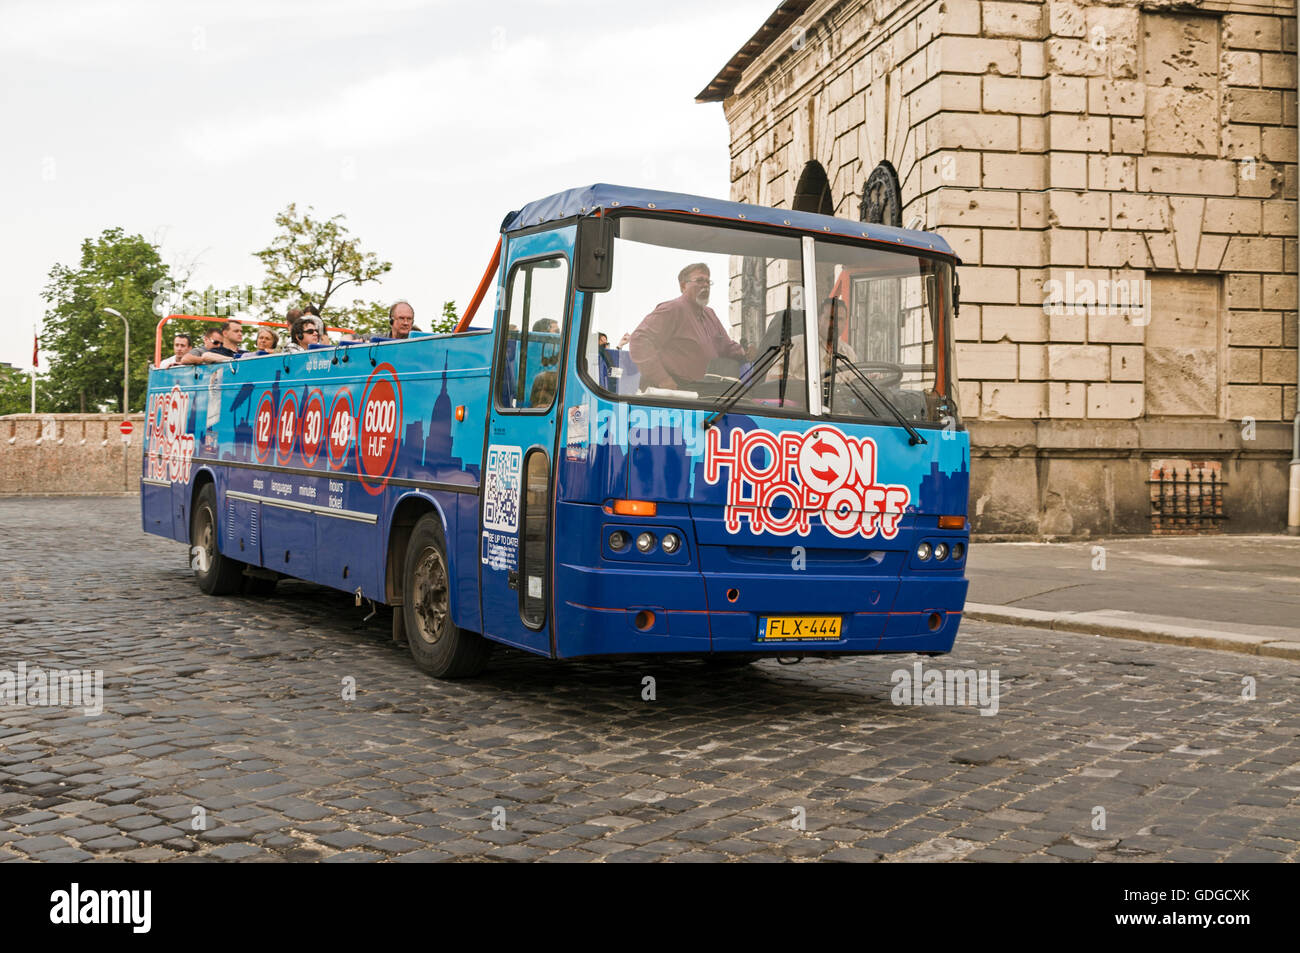 A tourist Hop-on-Hop-off bus on Buda Castle Hill in Budapest, Hungary. Stock Photo